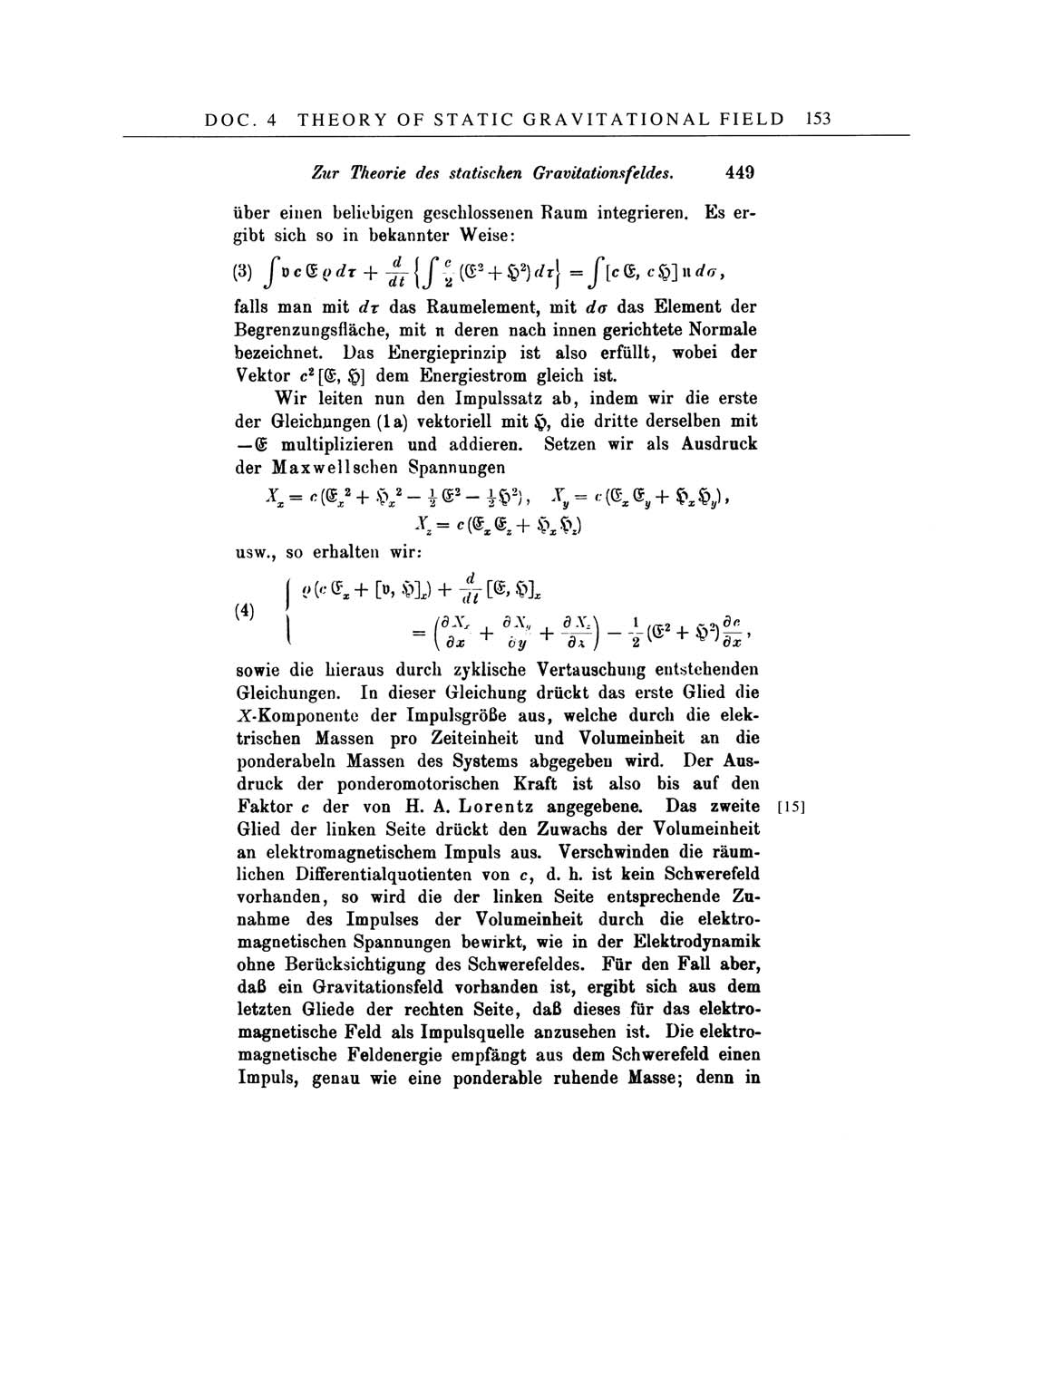 Volume 4: The Swiss Years: Writings 1912-1914 page 153